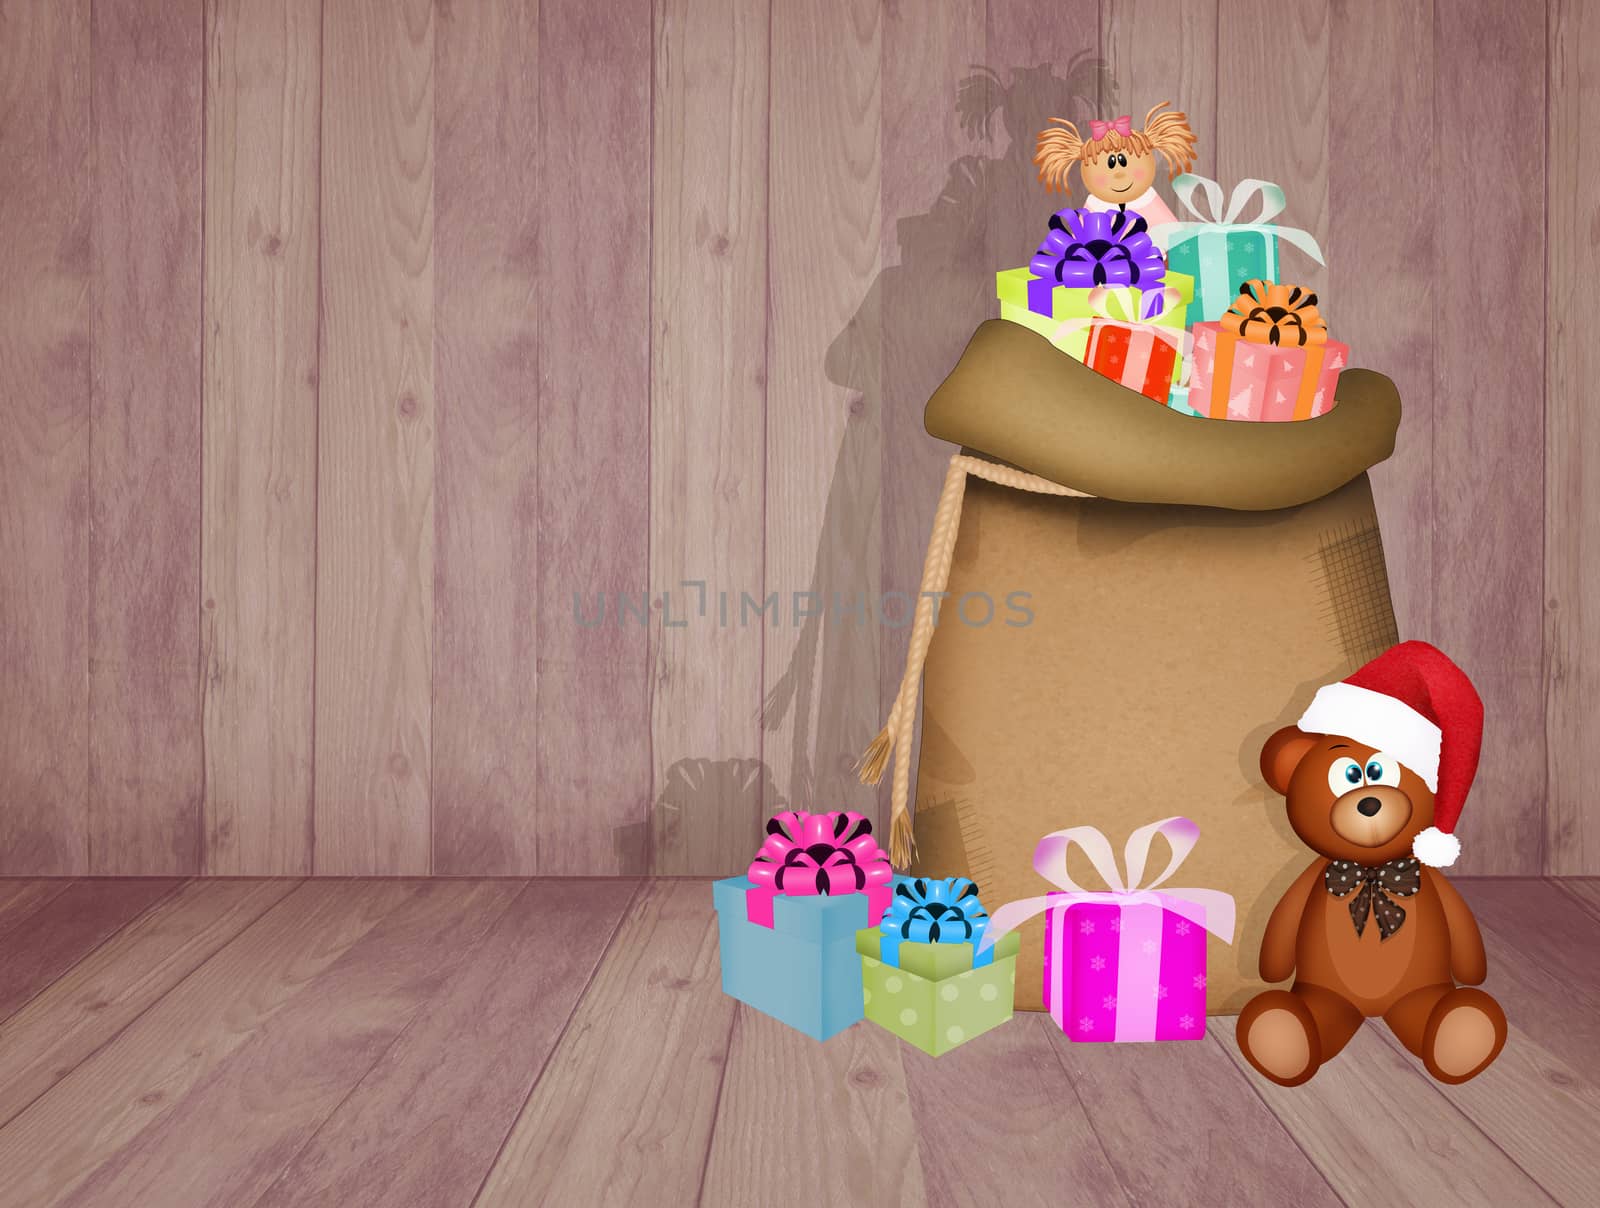 Christmas toys in the sack by adrenalina